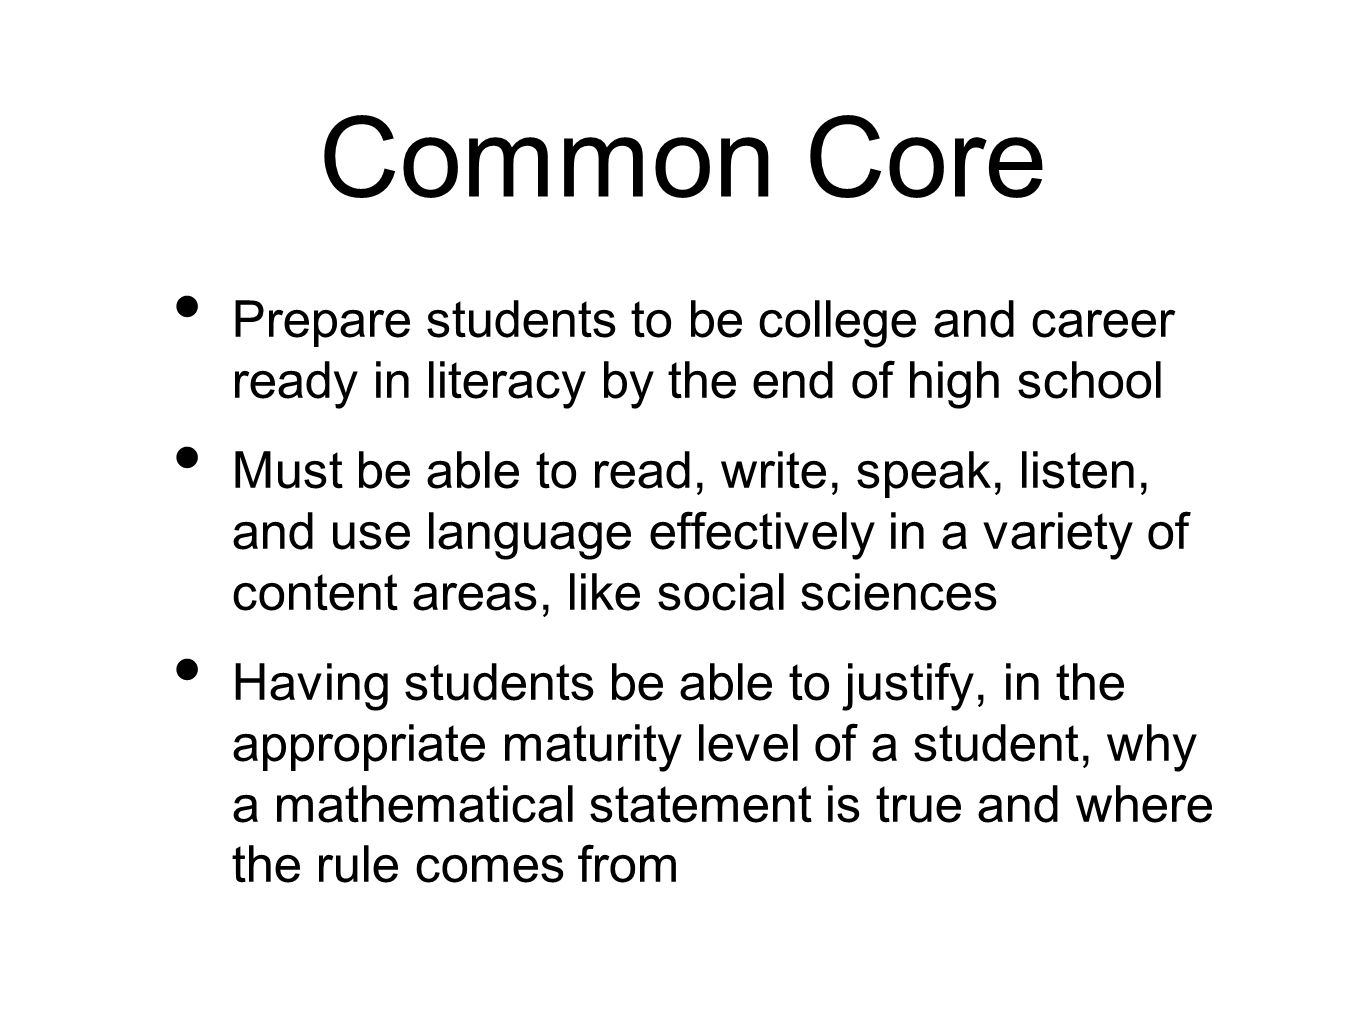 Common Core Prepare students to be college and career ready in literacy by the end of high school Must be able to read, write, speak, listen, and use language effectively in a variety of content areas, like social sciences Having students be able to justify, in the appropriate maturity level of a student, why a mathematical statement is true and where the rule comes from